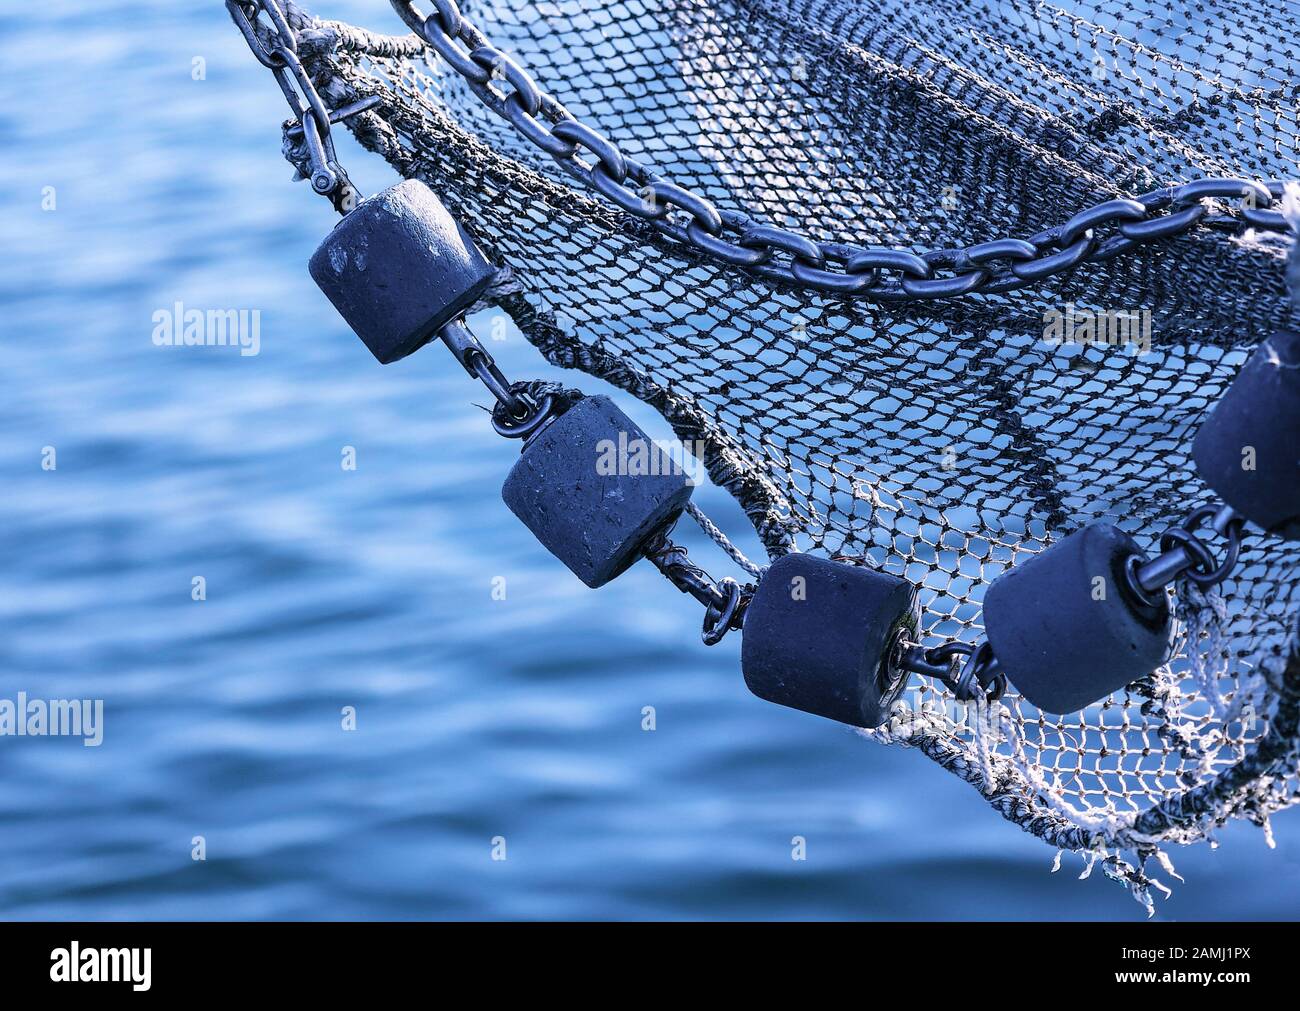 A typical fishing net for crab fishing in Neuharlingersiel / North Sea. Stock Photo